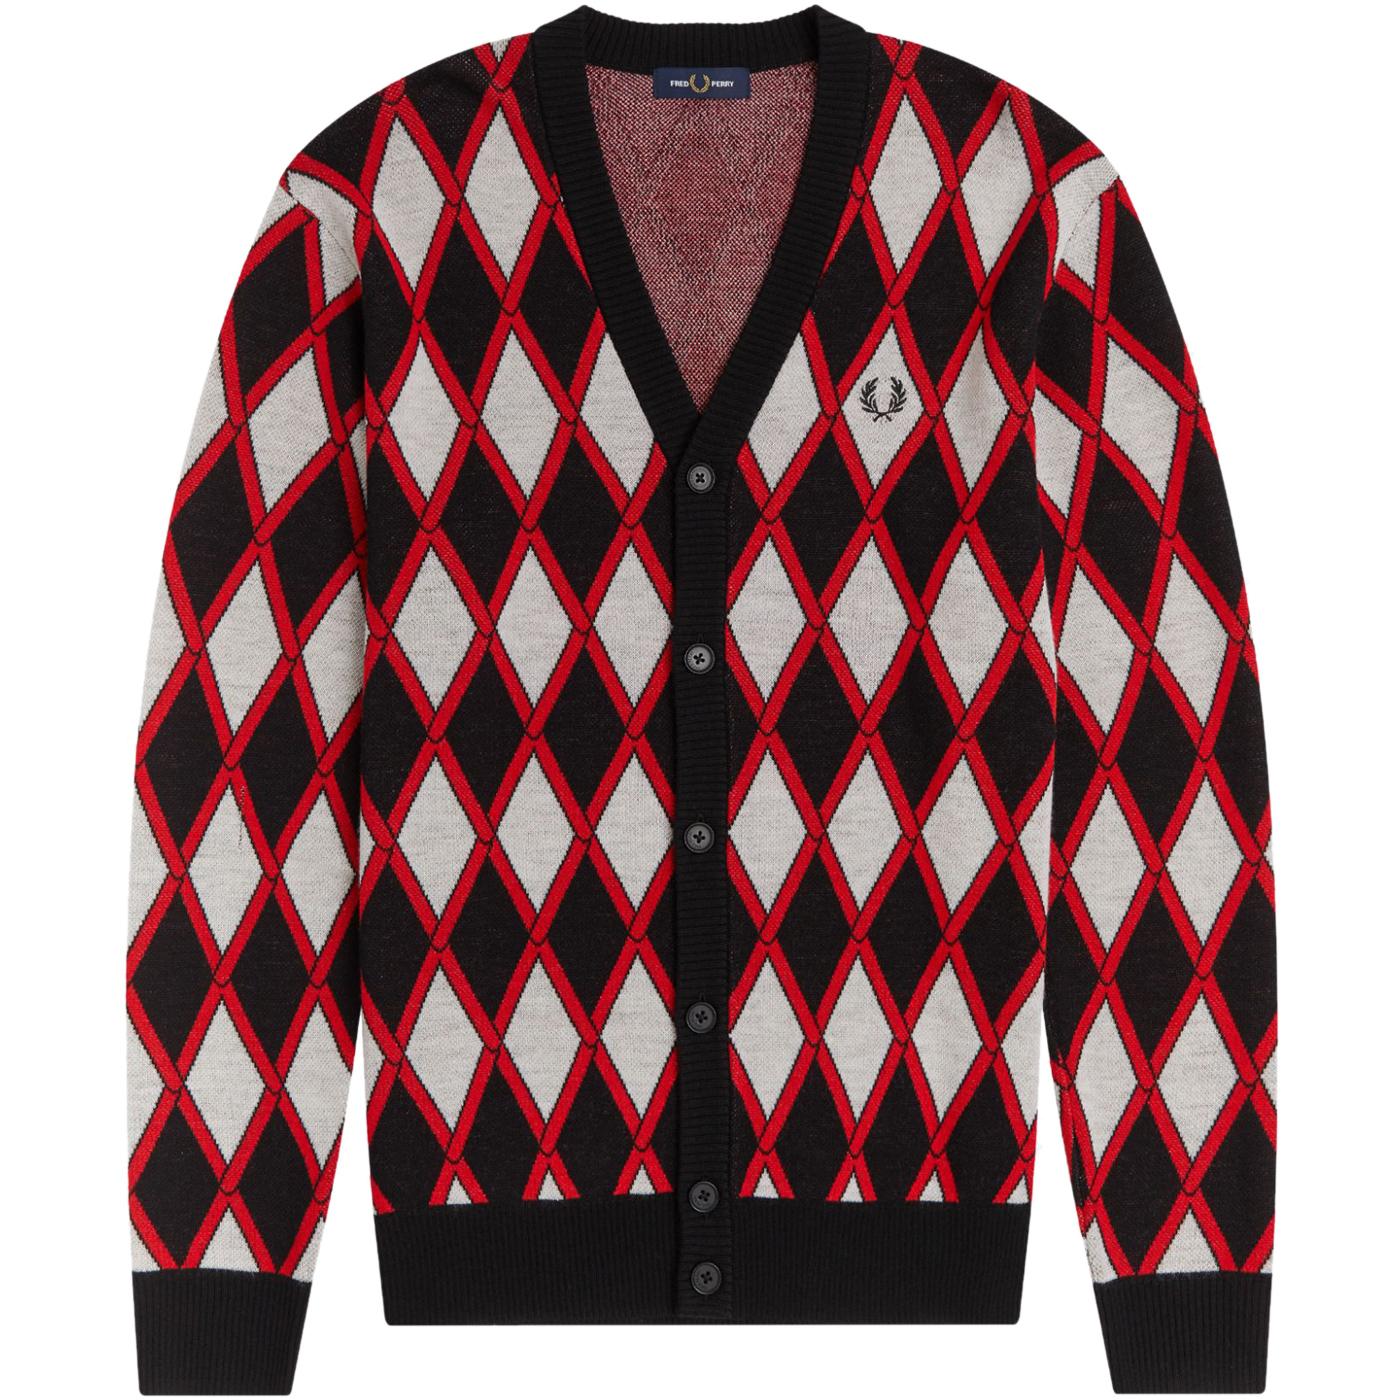 FRED PERRY 60s Mod Harlequin Argyle Cardigan